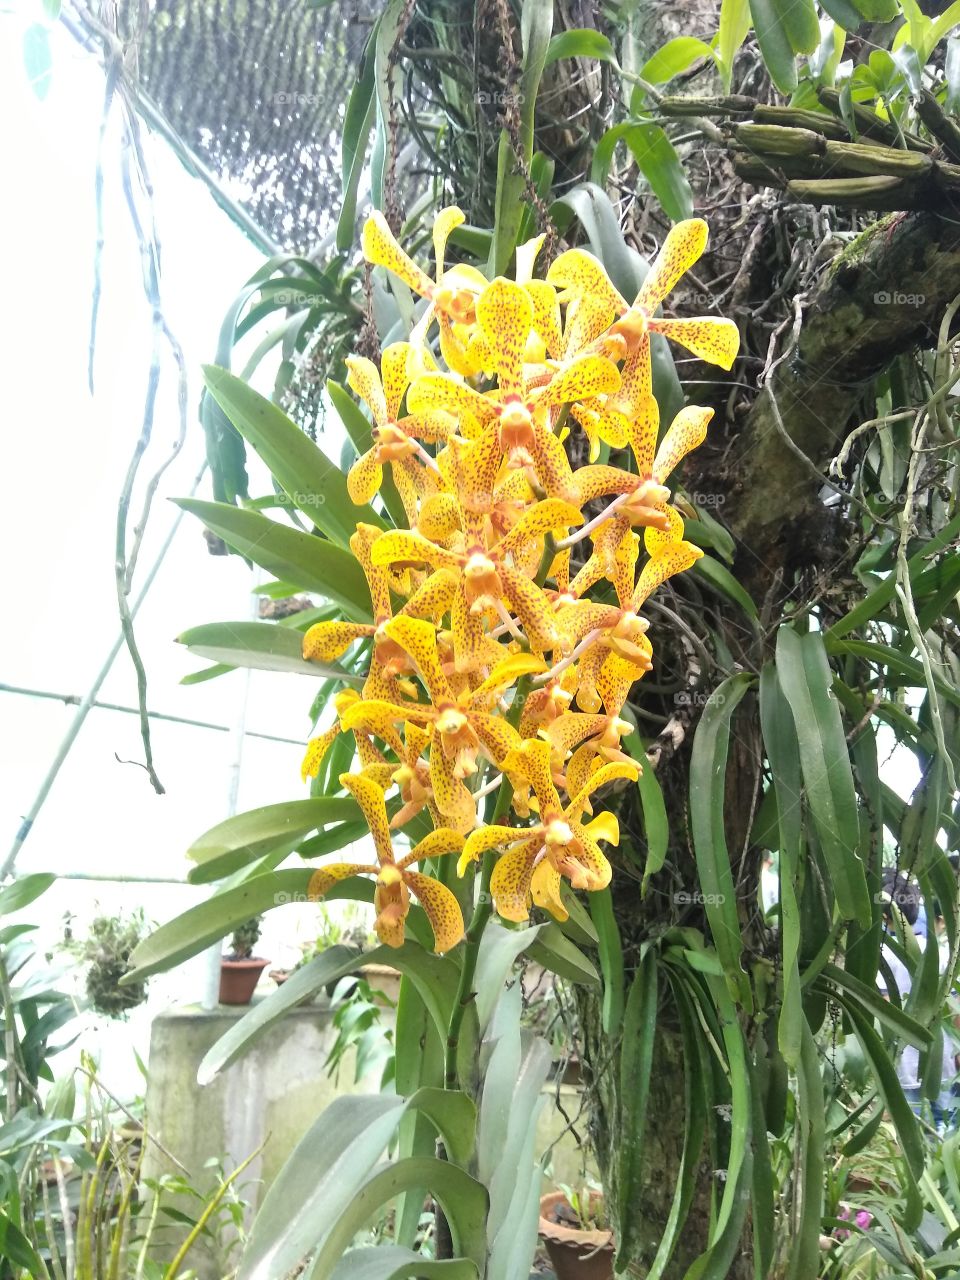 Wild Orchid(Yellow Vanda):
This beautiful rare species of orchid was collected from Jungle, grown in an artificial environment. Just look at her beauty.. Outstanding! right?